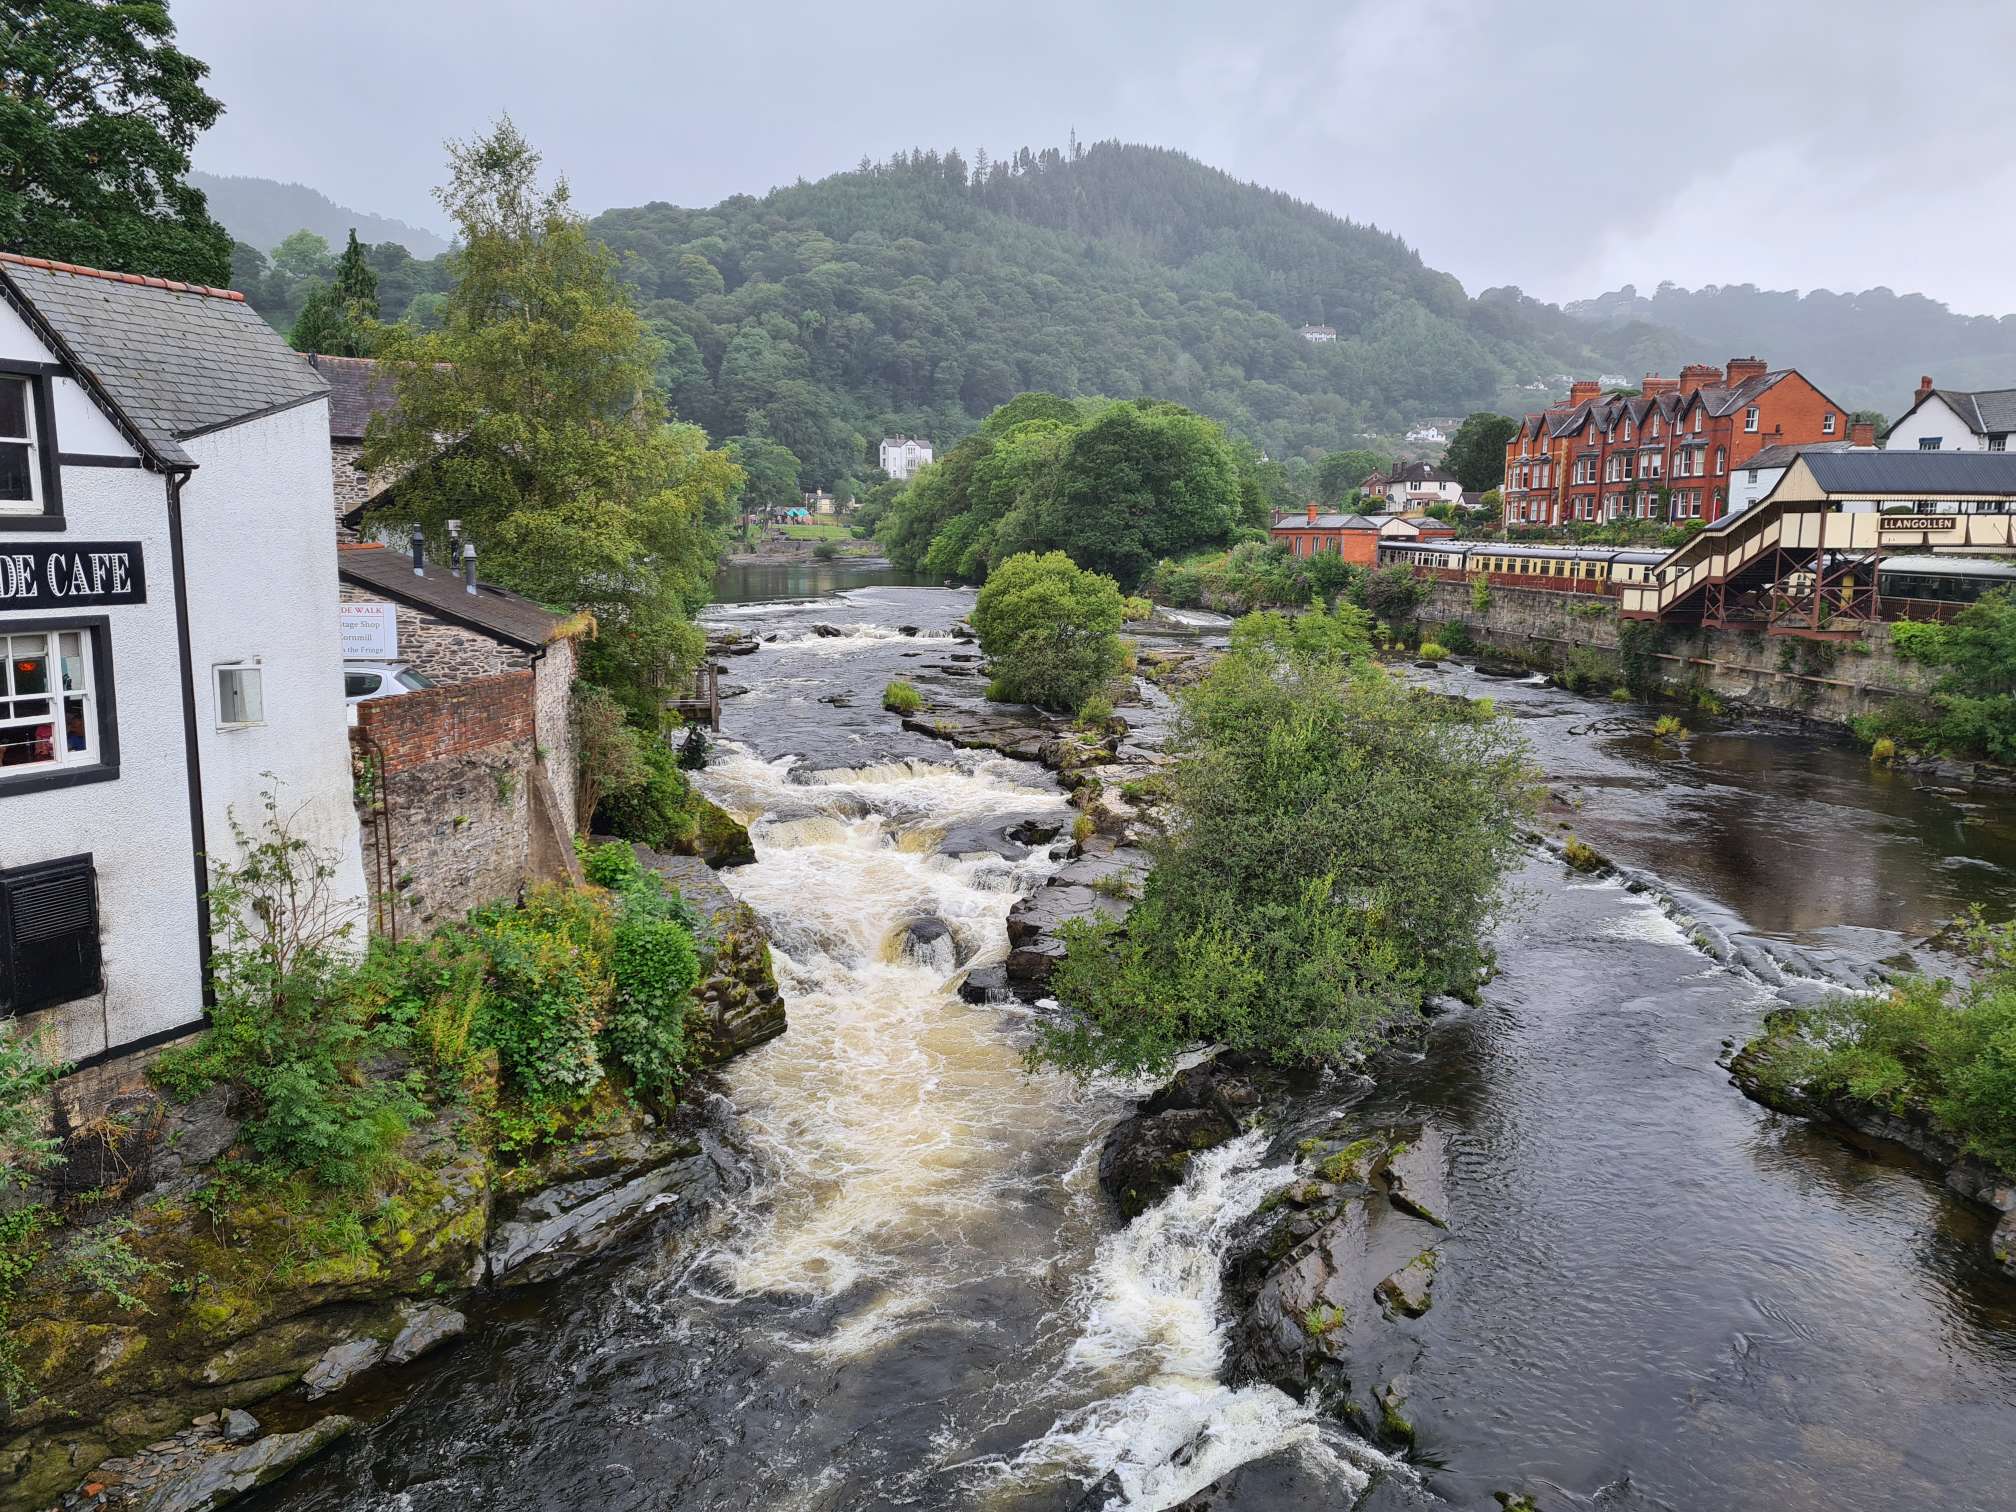 Turbulent waters of a fast flowing River Dee passing through Llangollen